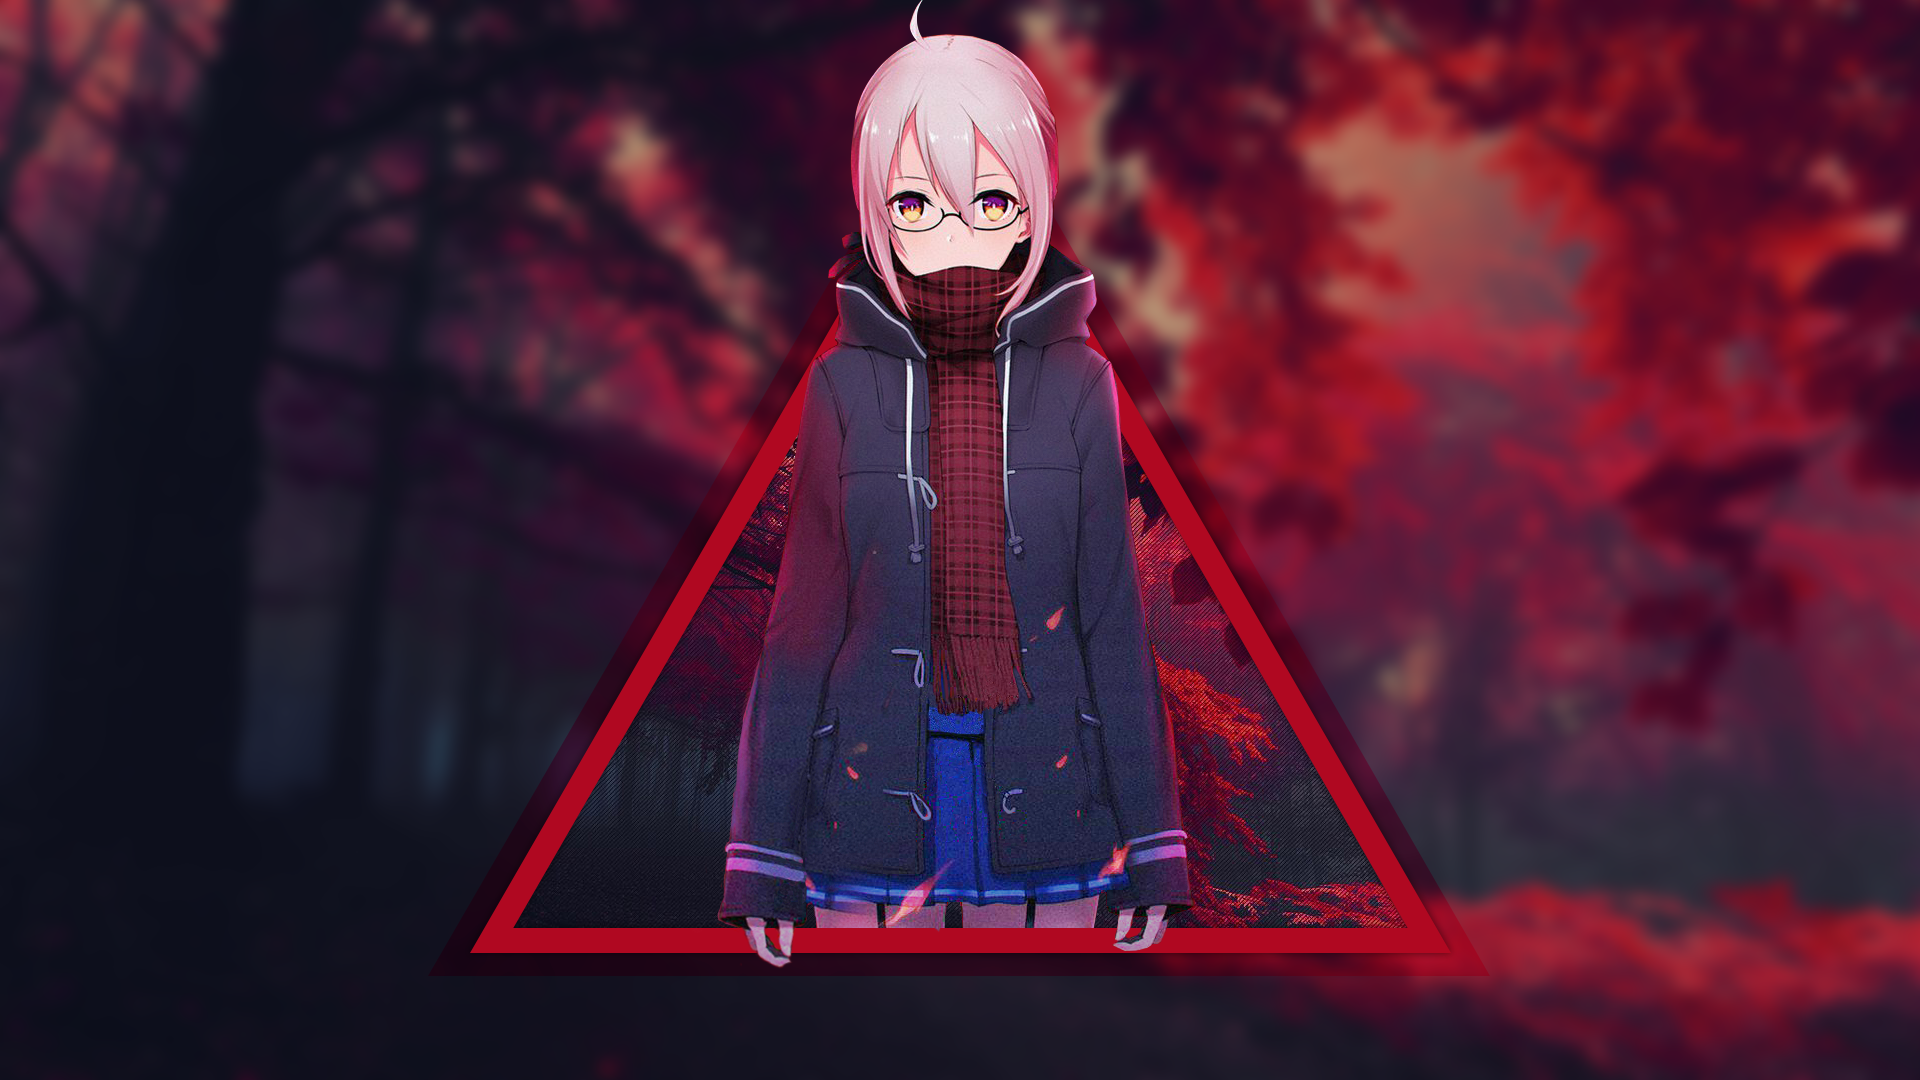 Red Forest Anime Girls Anime Pink Hair Triangle Glasses Mysterious Heroine X Alter Fate Grand Order Wallpaper:1920x1080